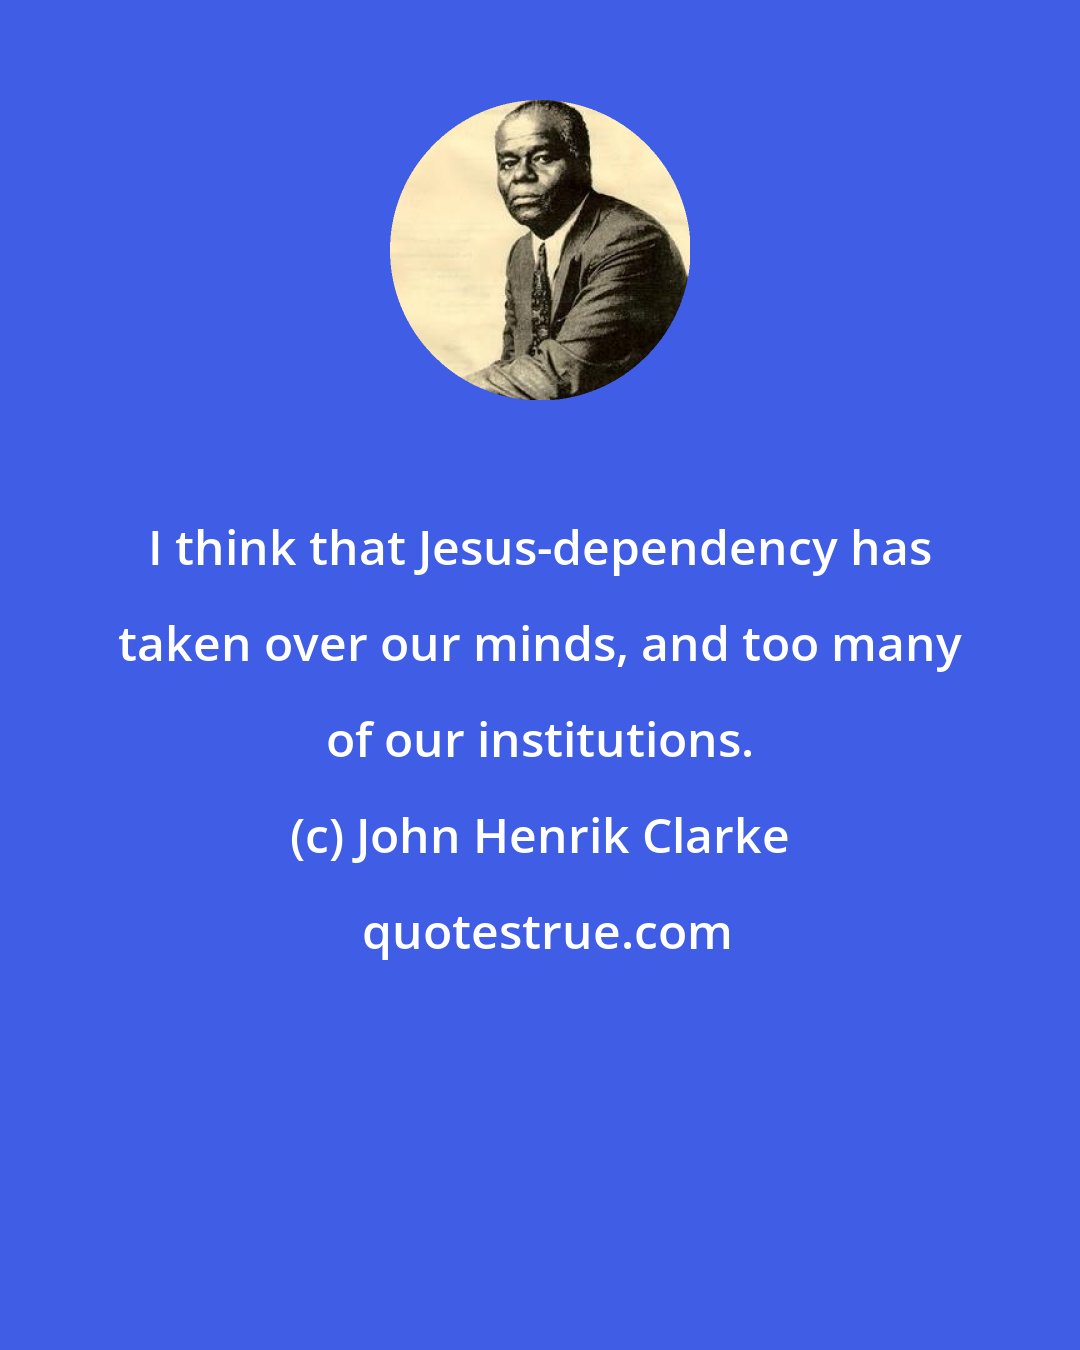 John Henrik Clarke: I think that Jesus-dependency has taken over our minds, and too many of our institutions.